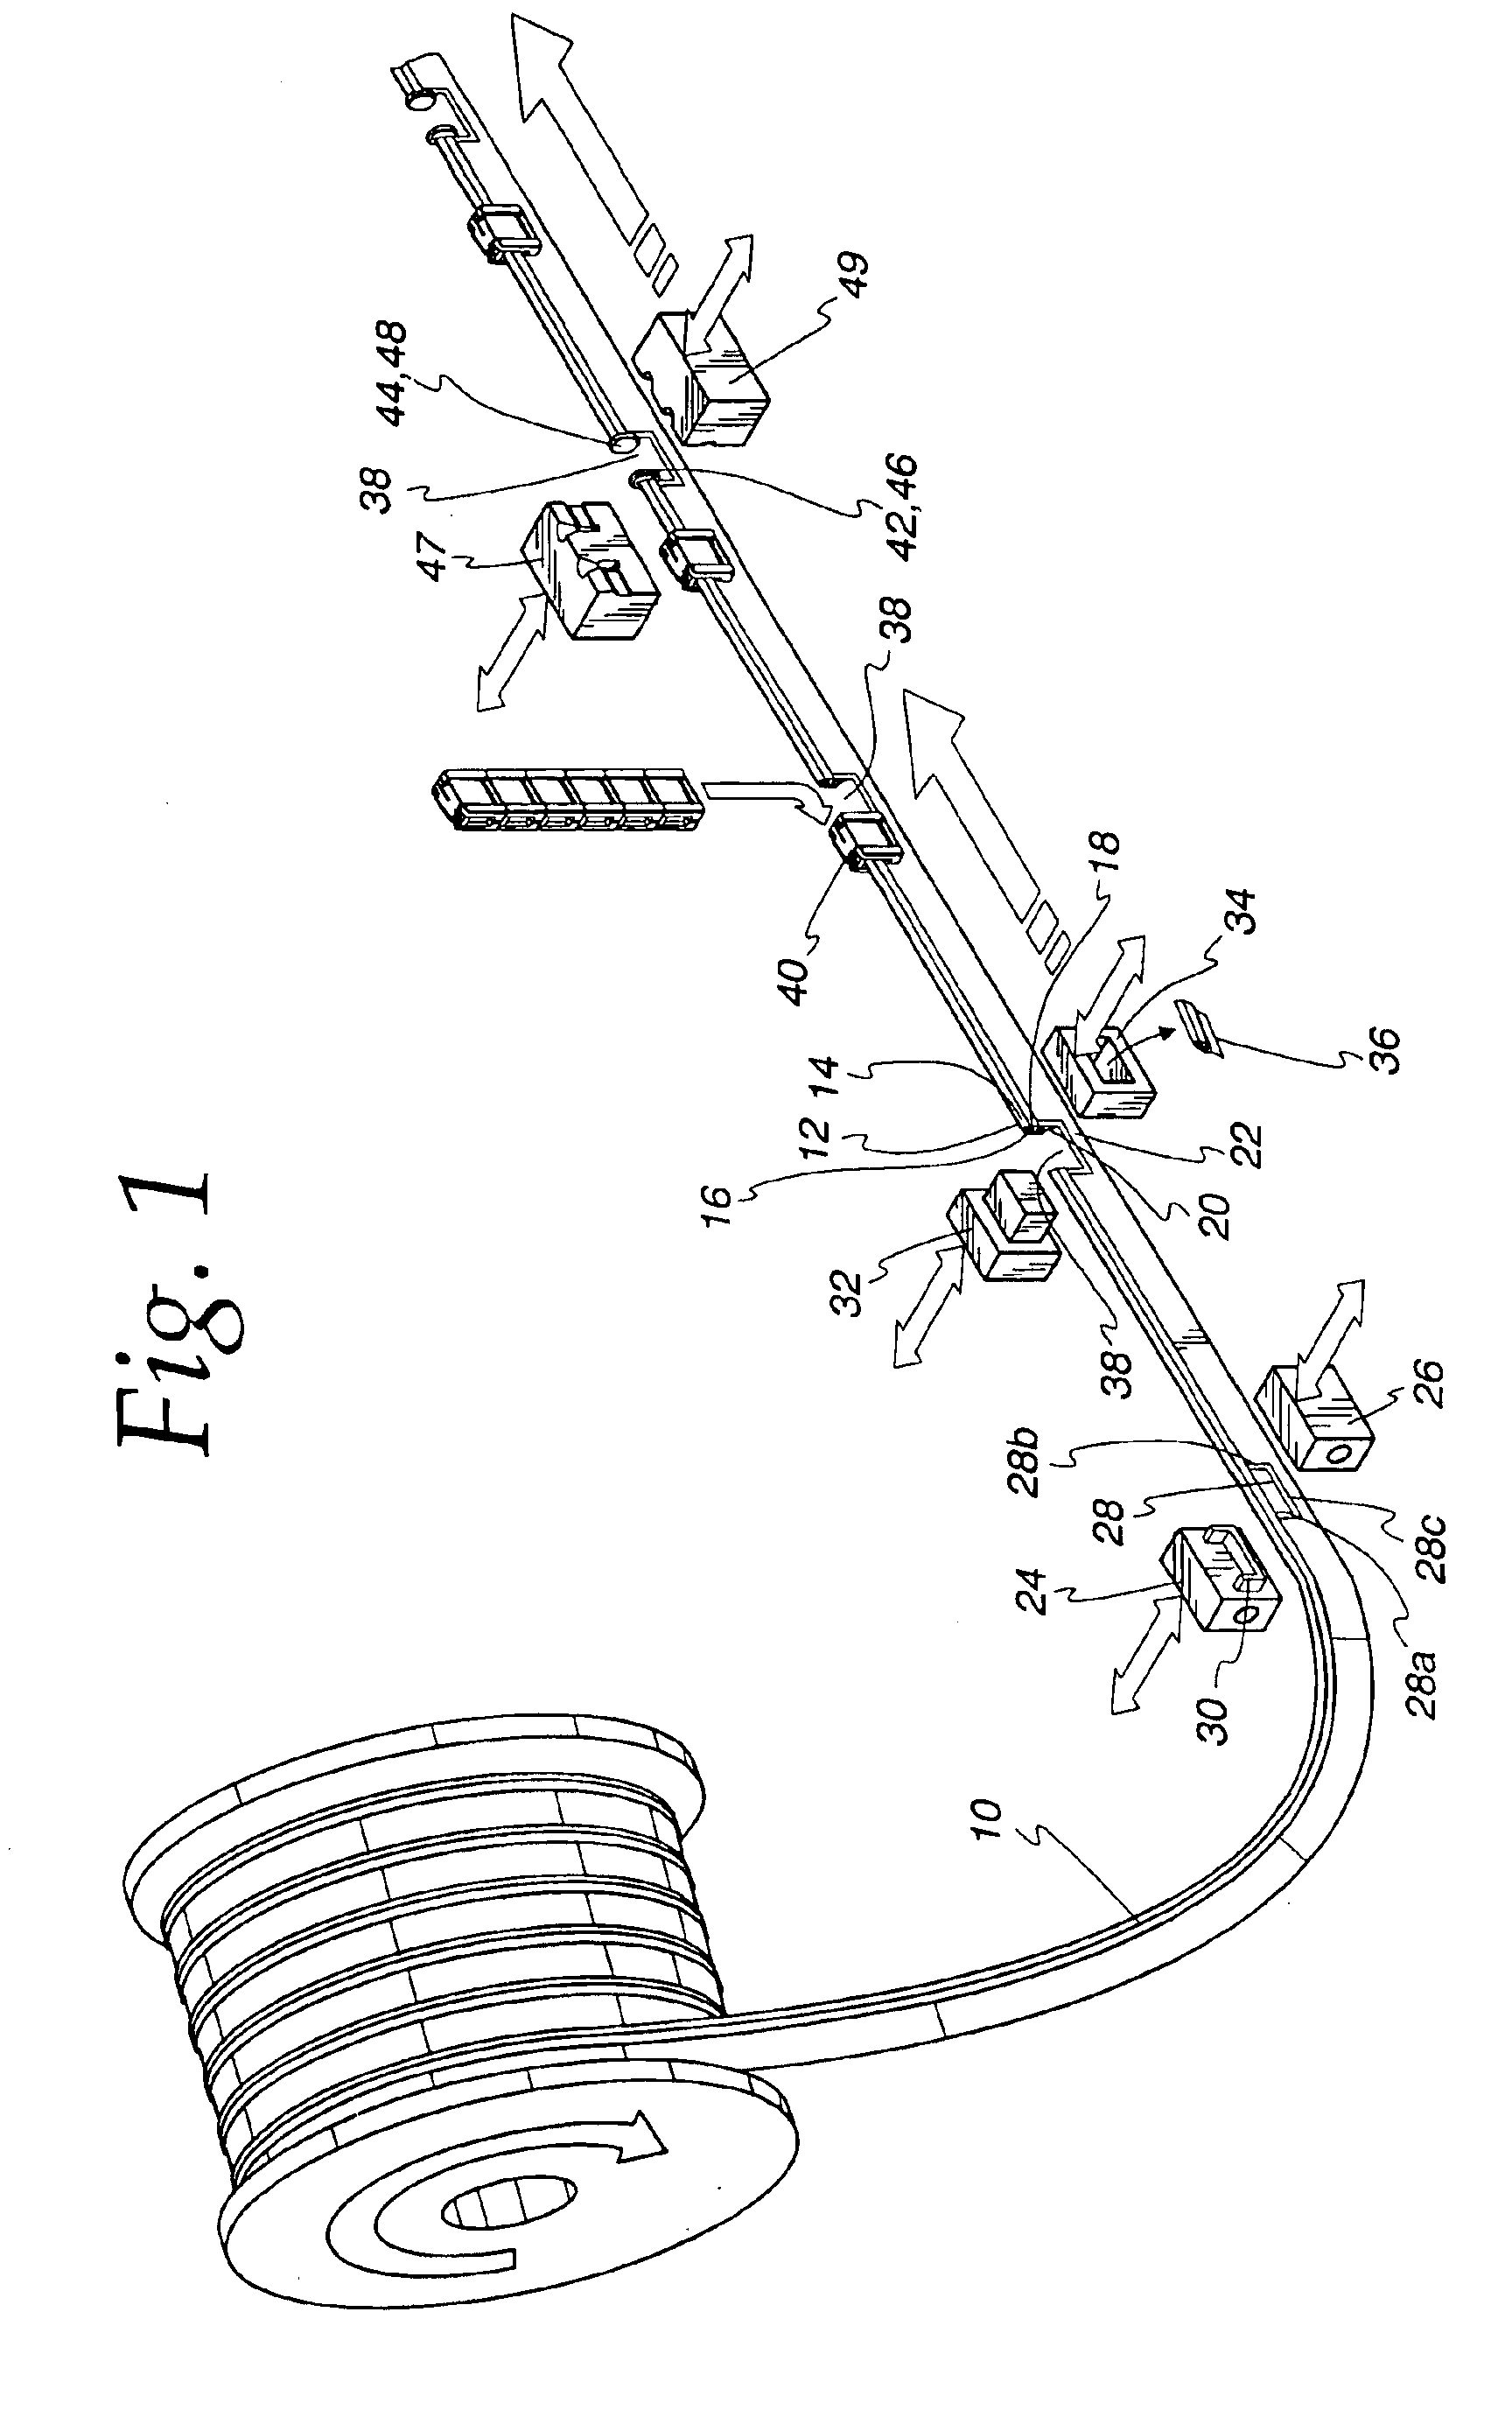 Method and apparatus for making reclosable plastic bags using a pre-applied slider-operated fastener